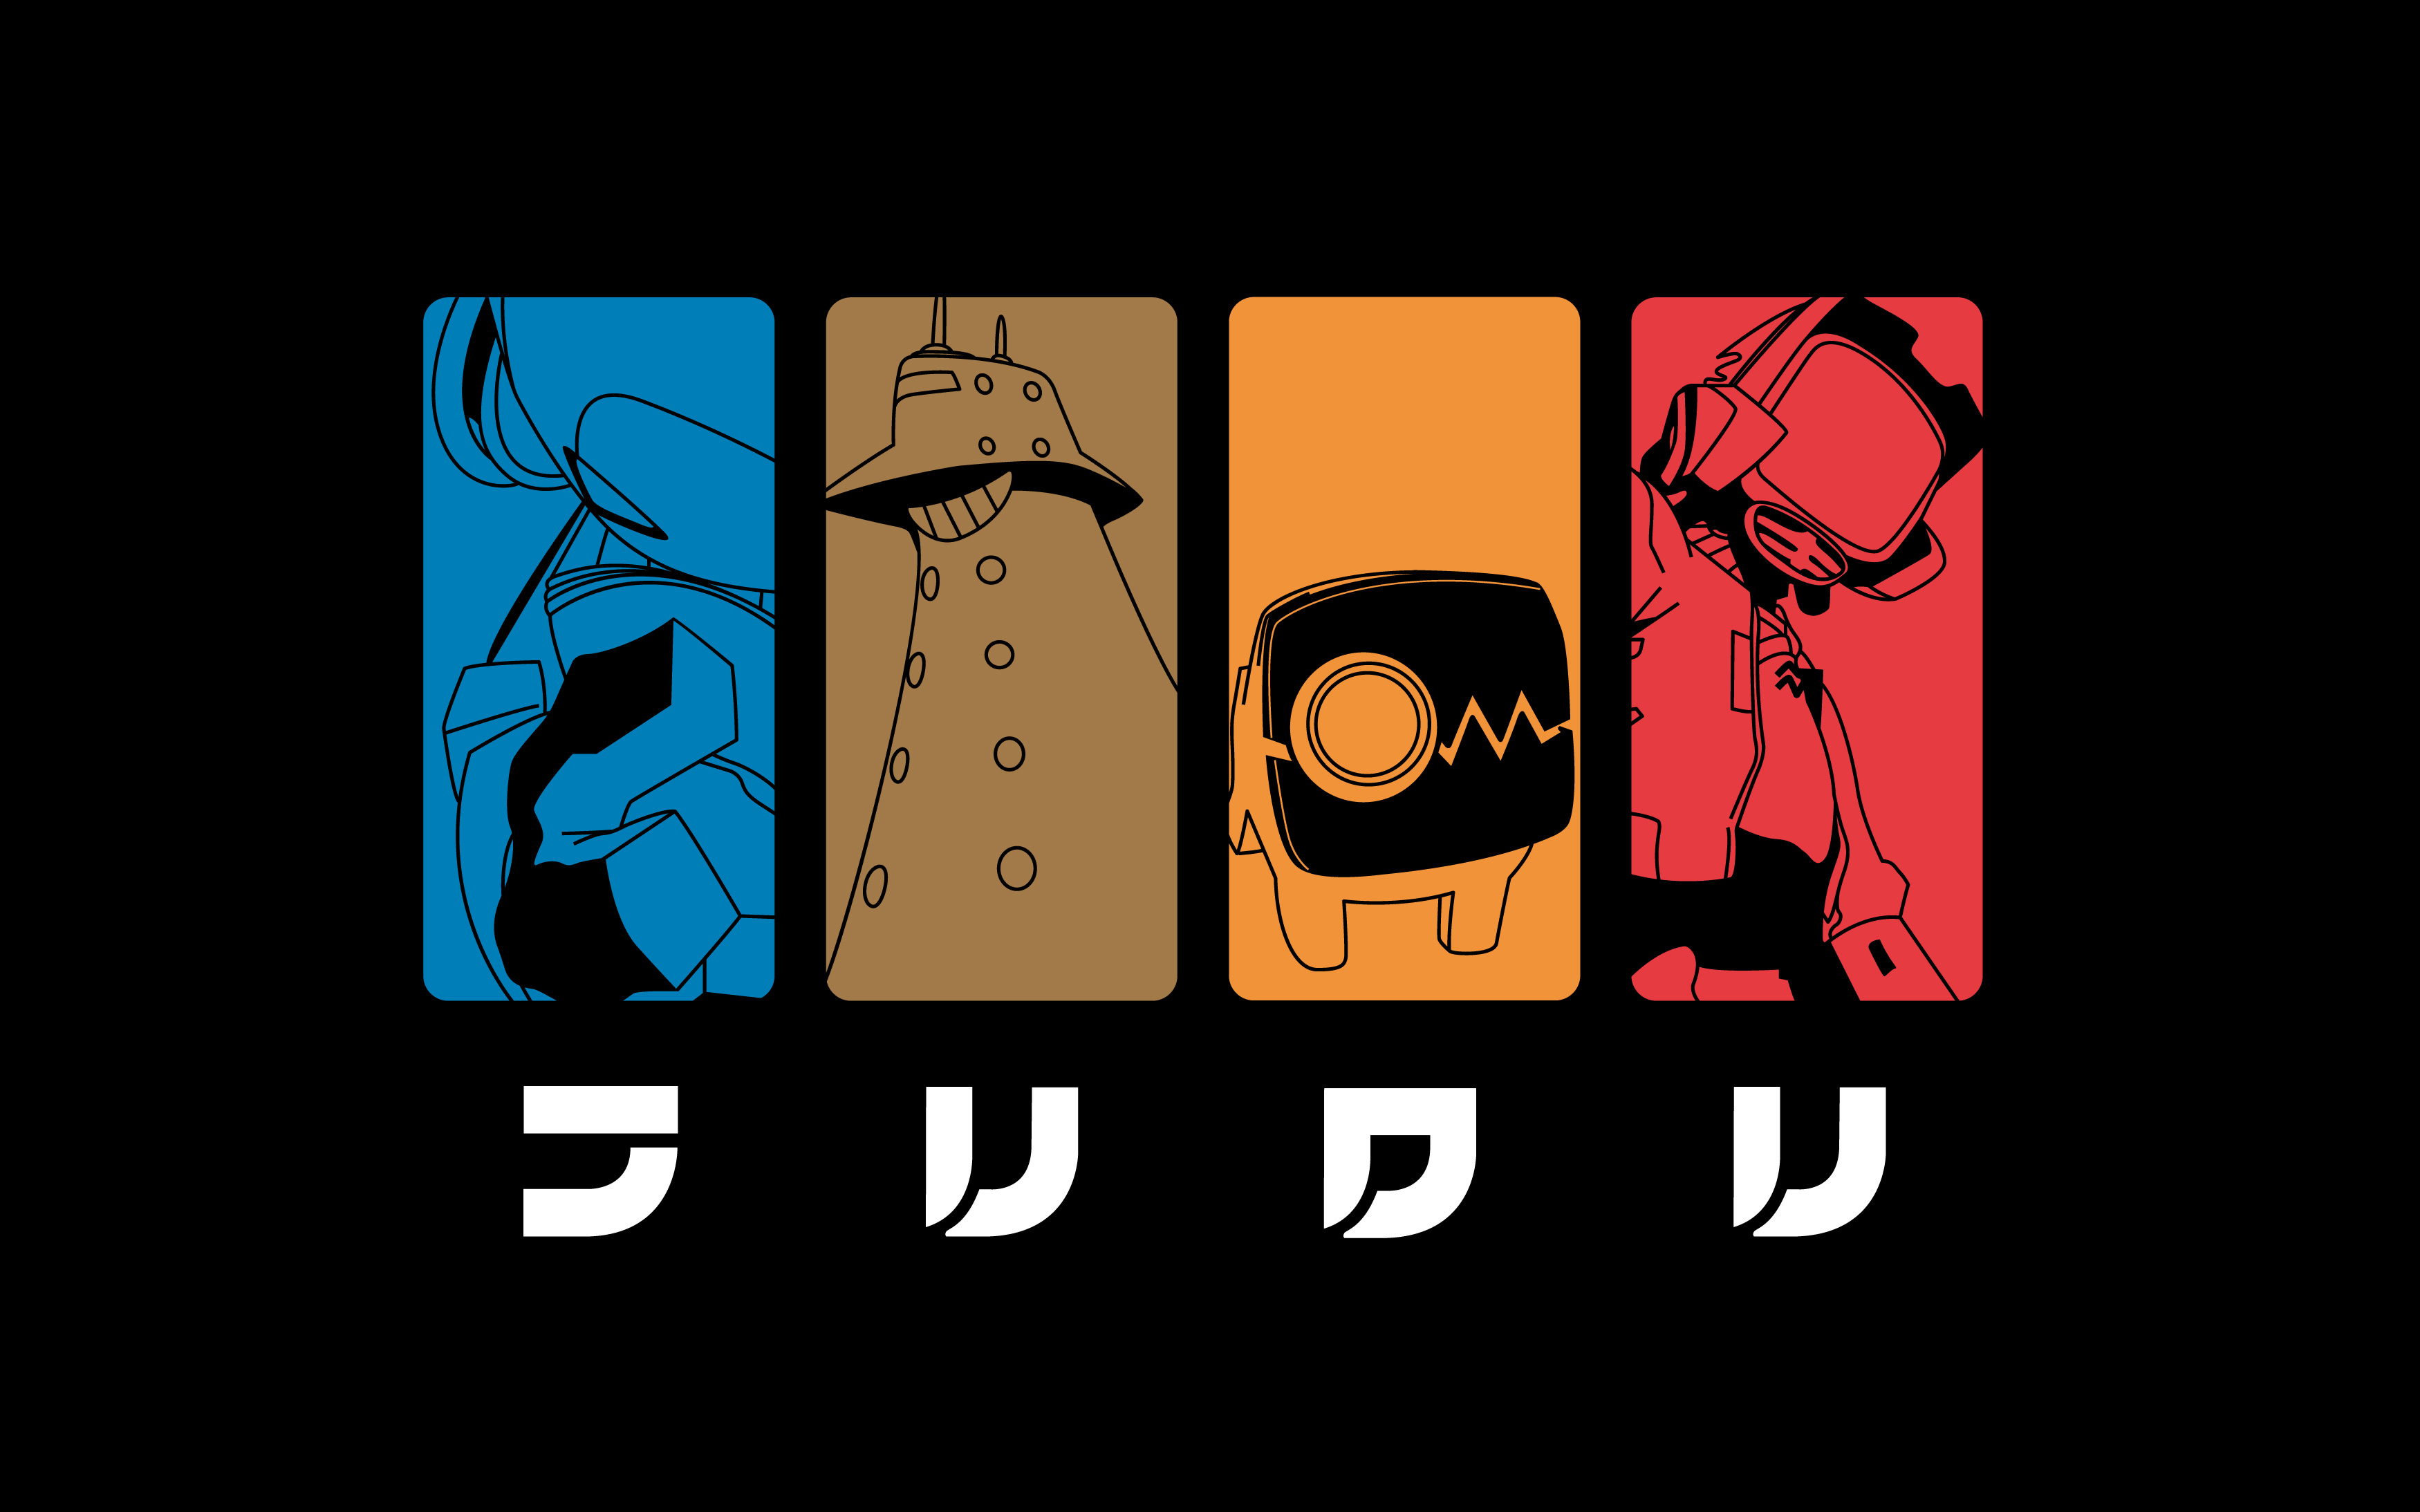 FLCL Fooly Cooly, Canti, simple background - desktop wallpaper